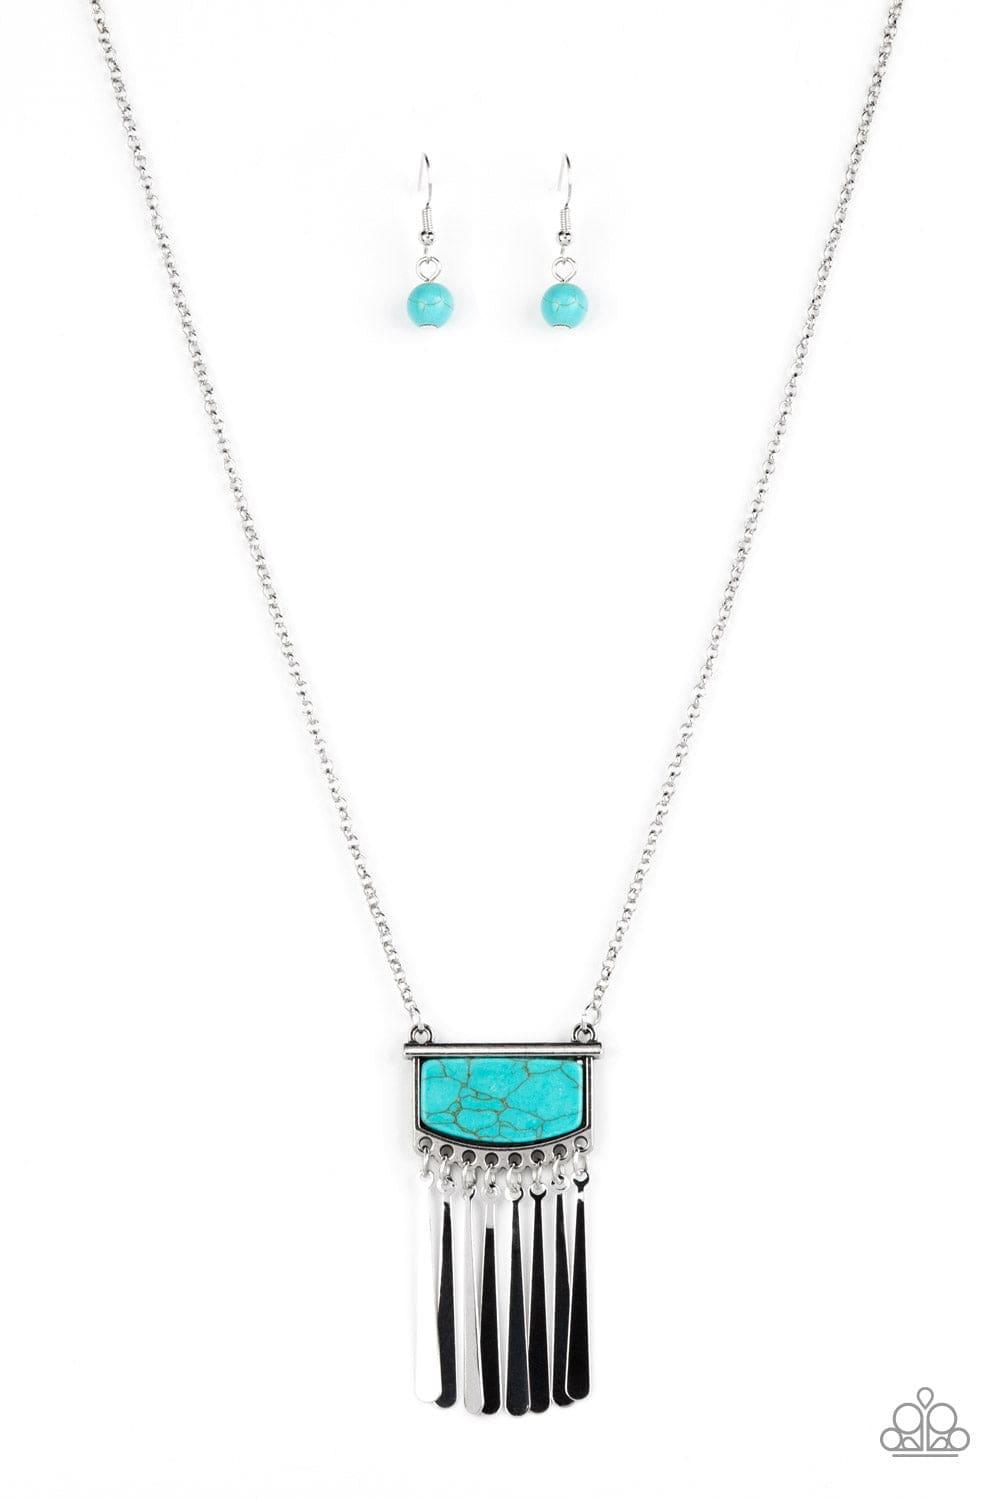 Paparazzi Accessories - Plateau Pioneer - Blue Necklace - Bling by JessieK